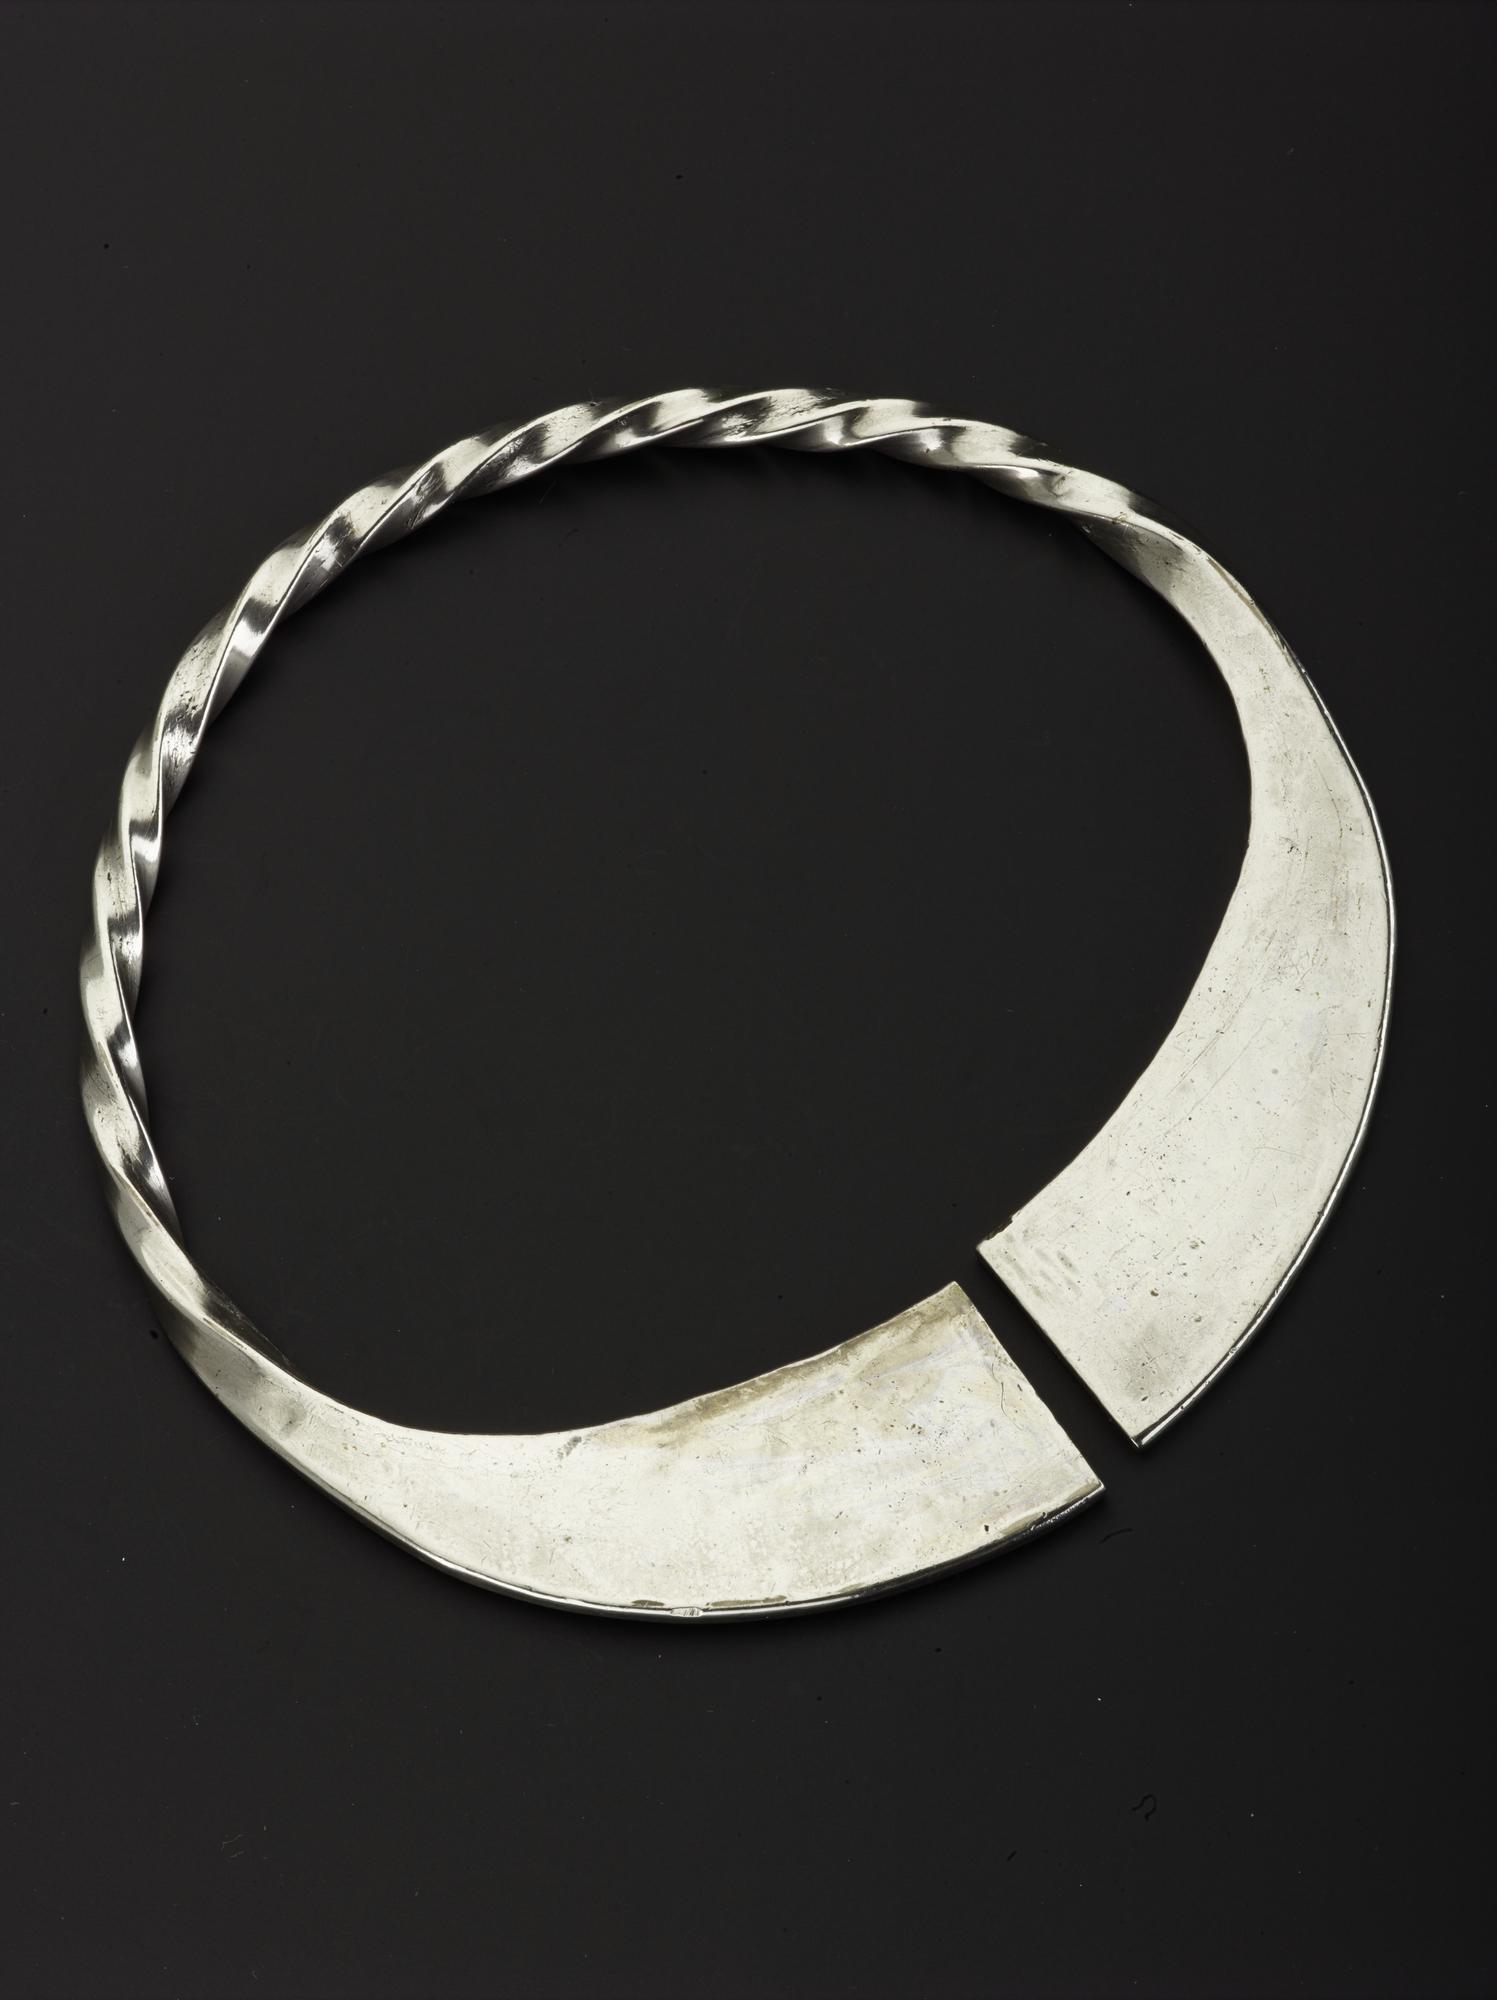 Image of Complete silver penannular brooch, pin missing, with plain terminals and twisted hoop, from Norrie